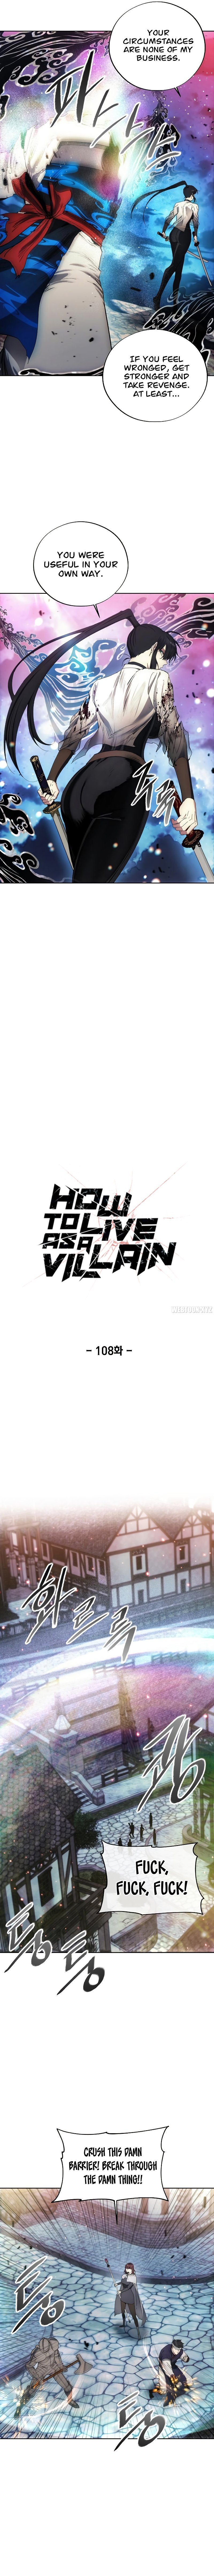 how-to-live-as-a-villain-chap-108-5